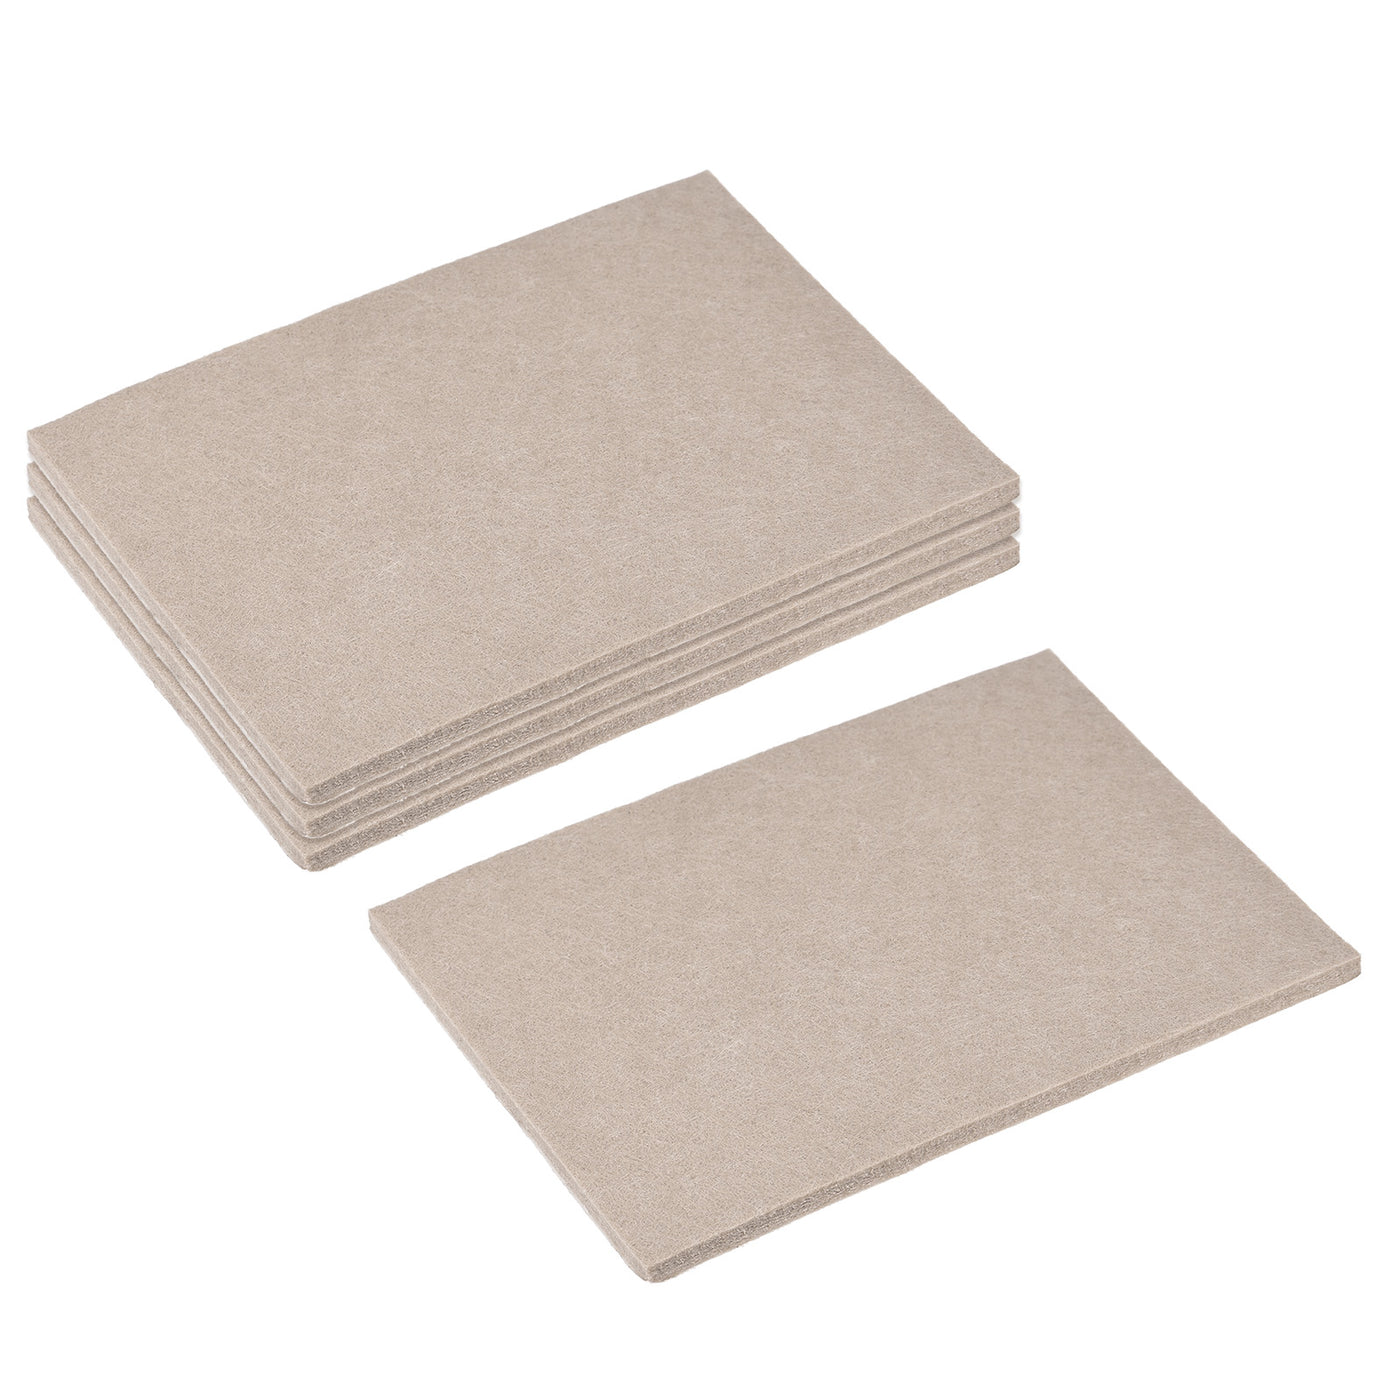 uxcell Uxcell Self Adhesive Square Furniture Felt Pads for Hardwood Tiles Self-adhesive